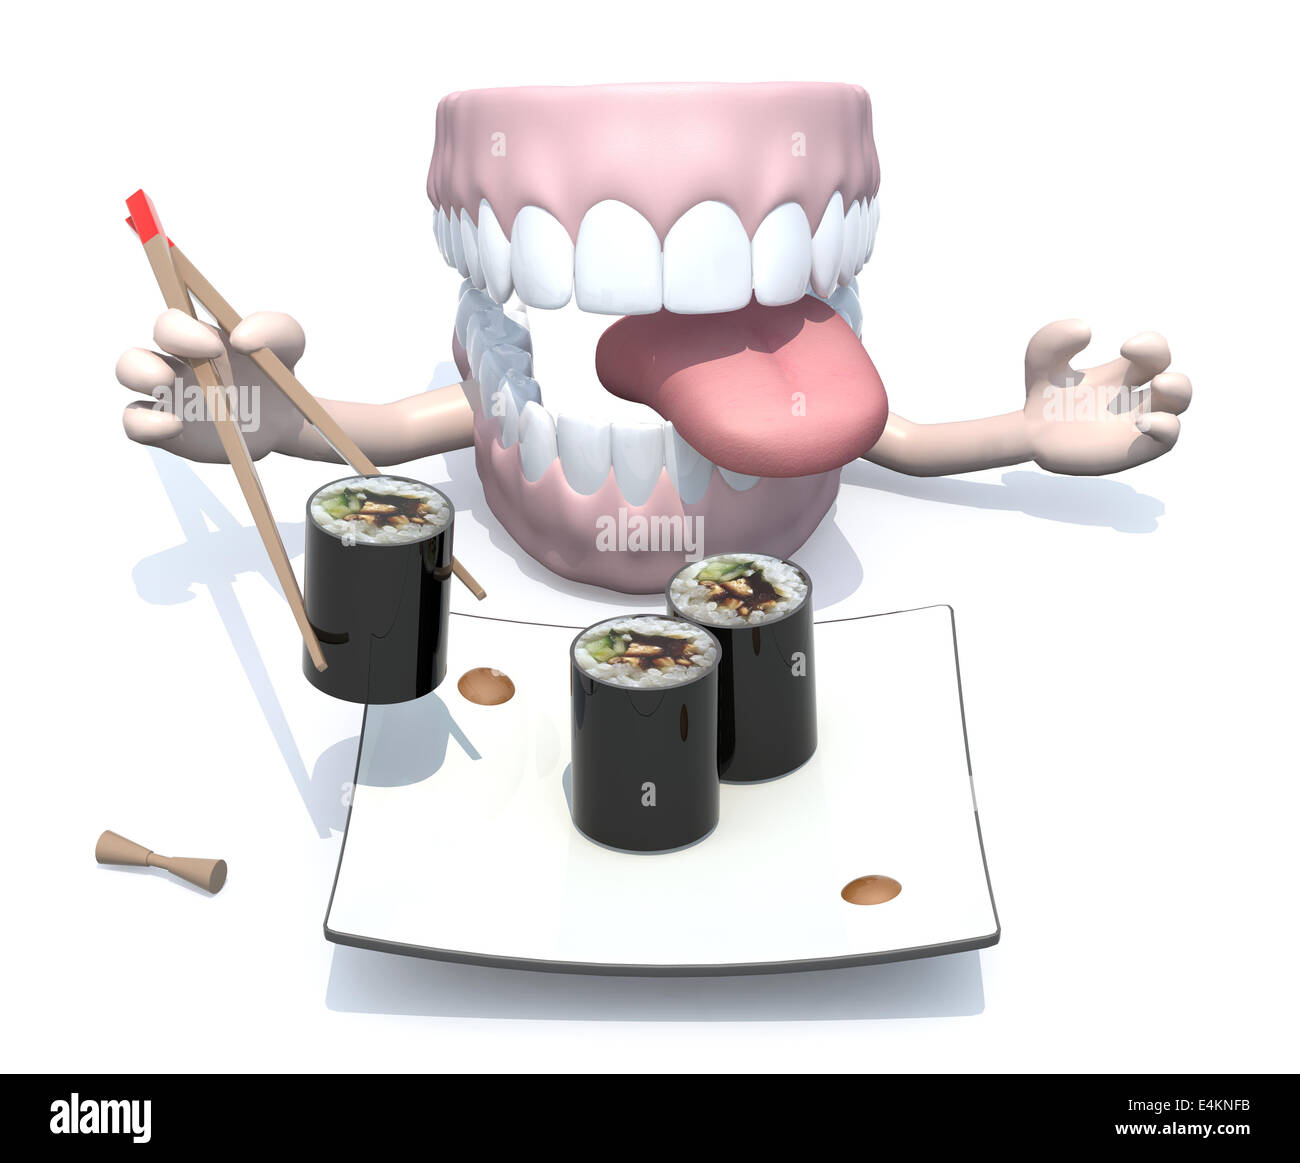 open denture with hands and chopsticks in front of an sushi plate, 3d illustration Stock Photo